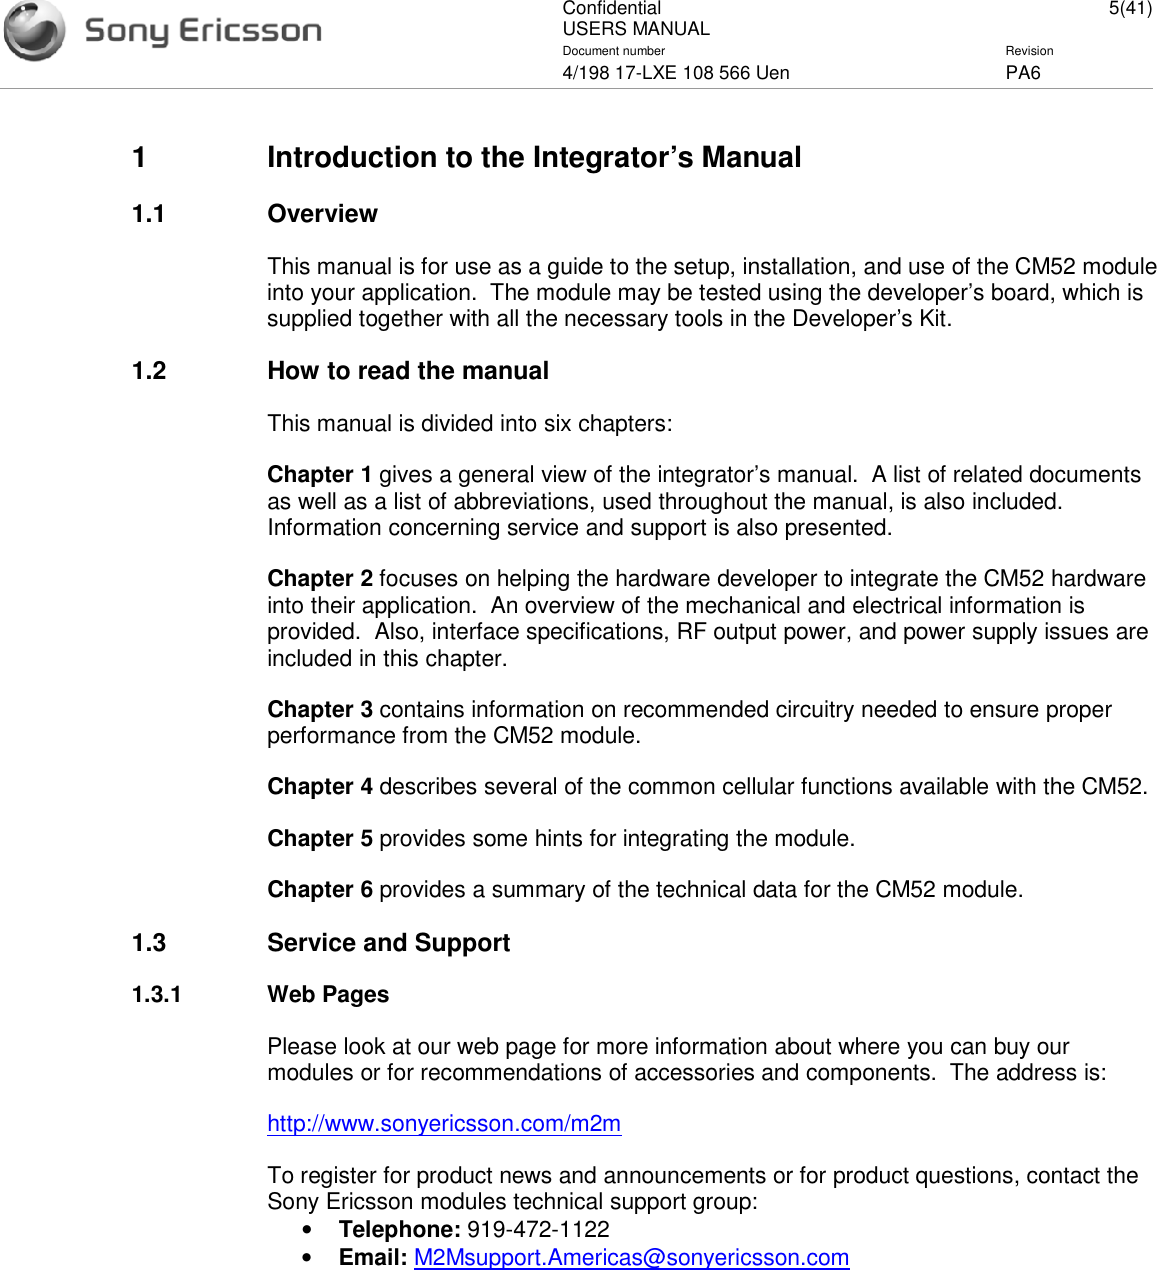 ConfidentialUSERS MANUAL 5(41)Document number Revision4/198 17-LXE 108 566 Uen PA61 Introduction to the Integrator’s Manual1.1 OverviewThis manual is for use as a guide to the setup, installation, and use of the CM52 moduleinto your application. The module may be tested using the developer’s board, which issupplied together with all the necessary tools in the Developer’s Kit.1.2 How to read the manualThis manual is divided into six chapters:Chapter 1 gives a general view of the integrator’s manual. A list of related documentsas well as a list of abbreviations, used throughout the manual, is also included.Information concerning service and support is also presented.Chapter 2 focuses on helping the hardware developer to integrate the CM52 hardwareinto their application. An overview of the mechanical and electrical information isprovided. Also, interface specifications, RF output power, and power supply issues areincluded in this chapter.Chapter 3 contains information on recommended circuitry needed to ensure properperformance from the CM52 module.Chapter 4 describes several of the common cellular functions available with the CM52.Chapter 5 provides some hints for integrating the module.Chapter 6 provides a summary of the technical data for the CM52 module.1.3 Service and Support1.3.1 Web PagesPlease look at our web page for more information about where you can buy ourmodules or for recommendations of accessories and components. The address is:http://www.sonyericsson.com/m2mTo register for product news and announcements or for product questions, contact theSony Ericsson modules technical support group:•Telephone: 919-472-1122•Email: M2Msupport.Americas@sonyericsson.com